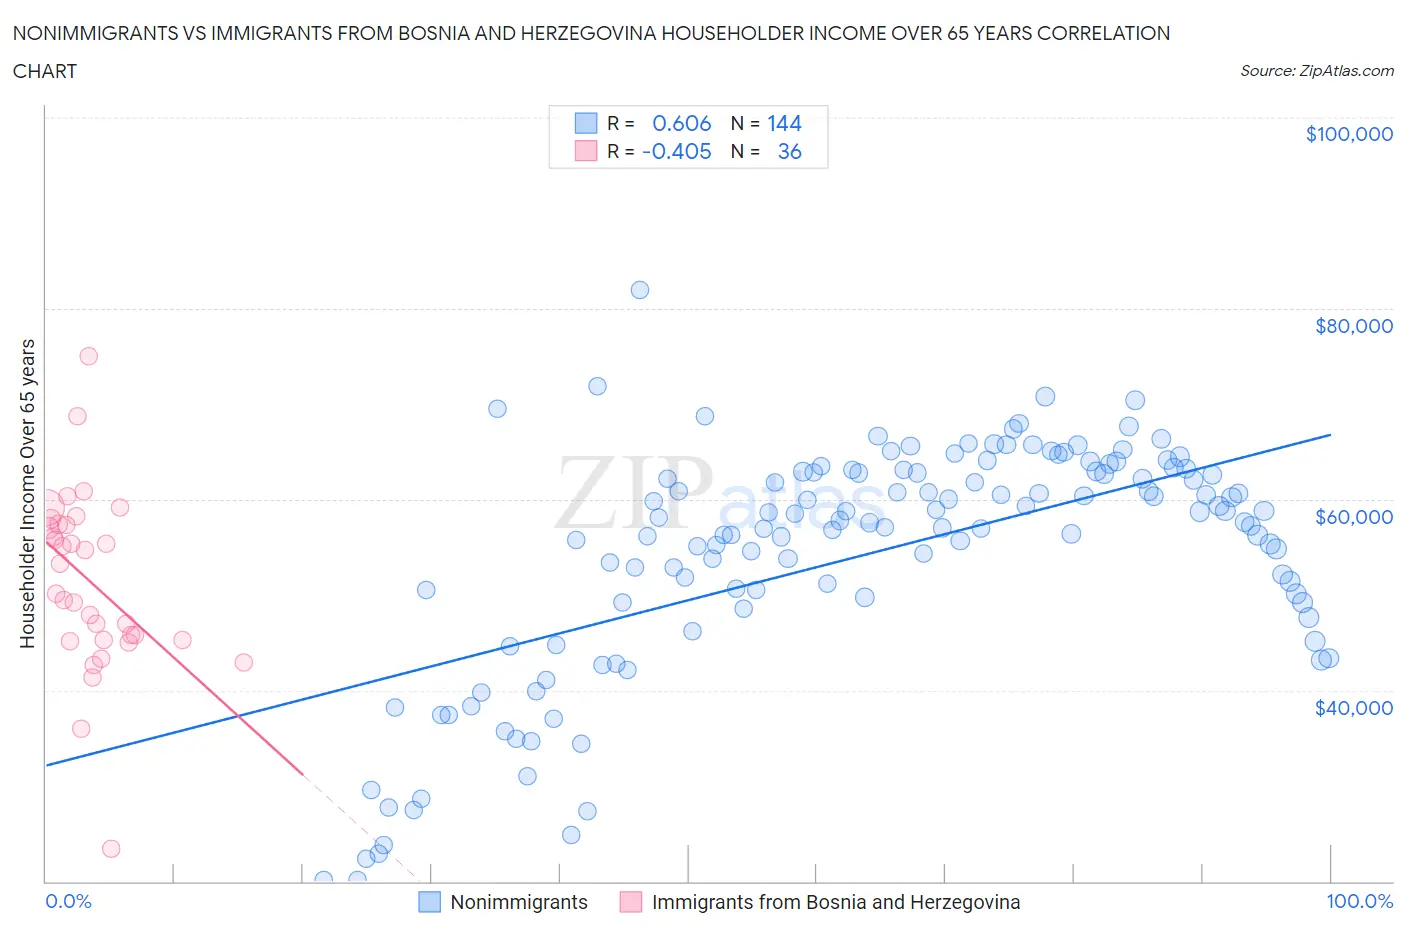 Nonimmigrants vs Immigrants from Bosnia and Herzegovina Householder Income Over 65 years